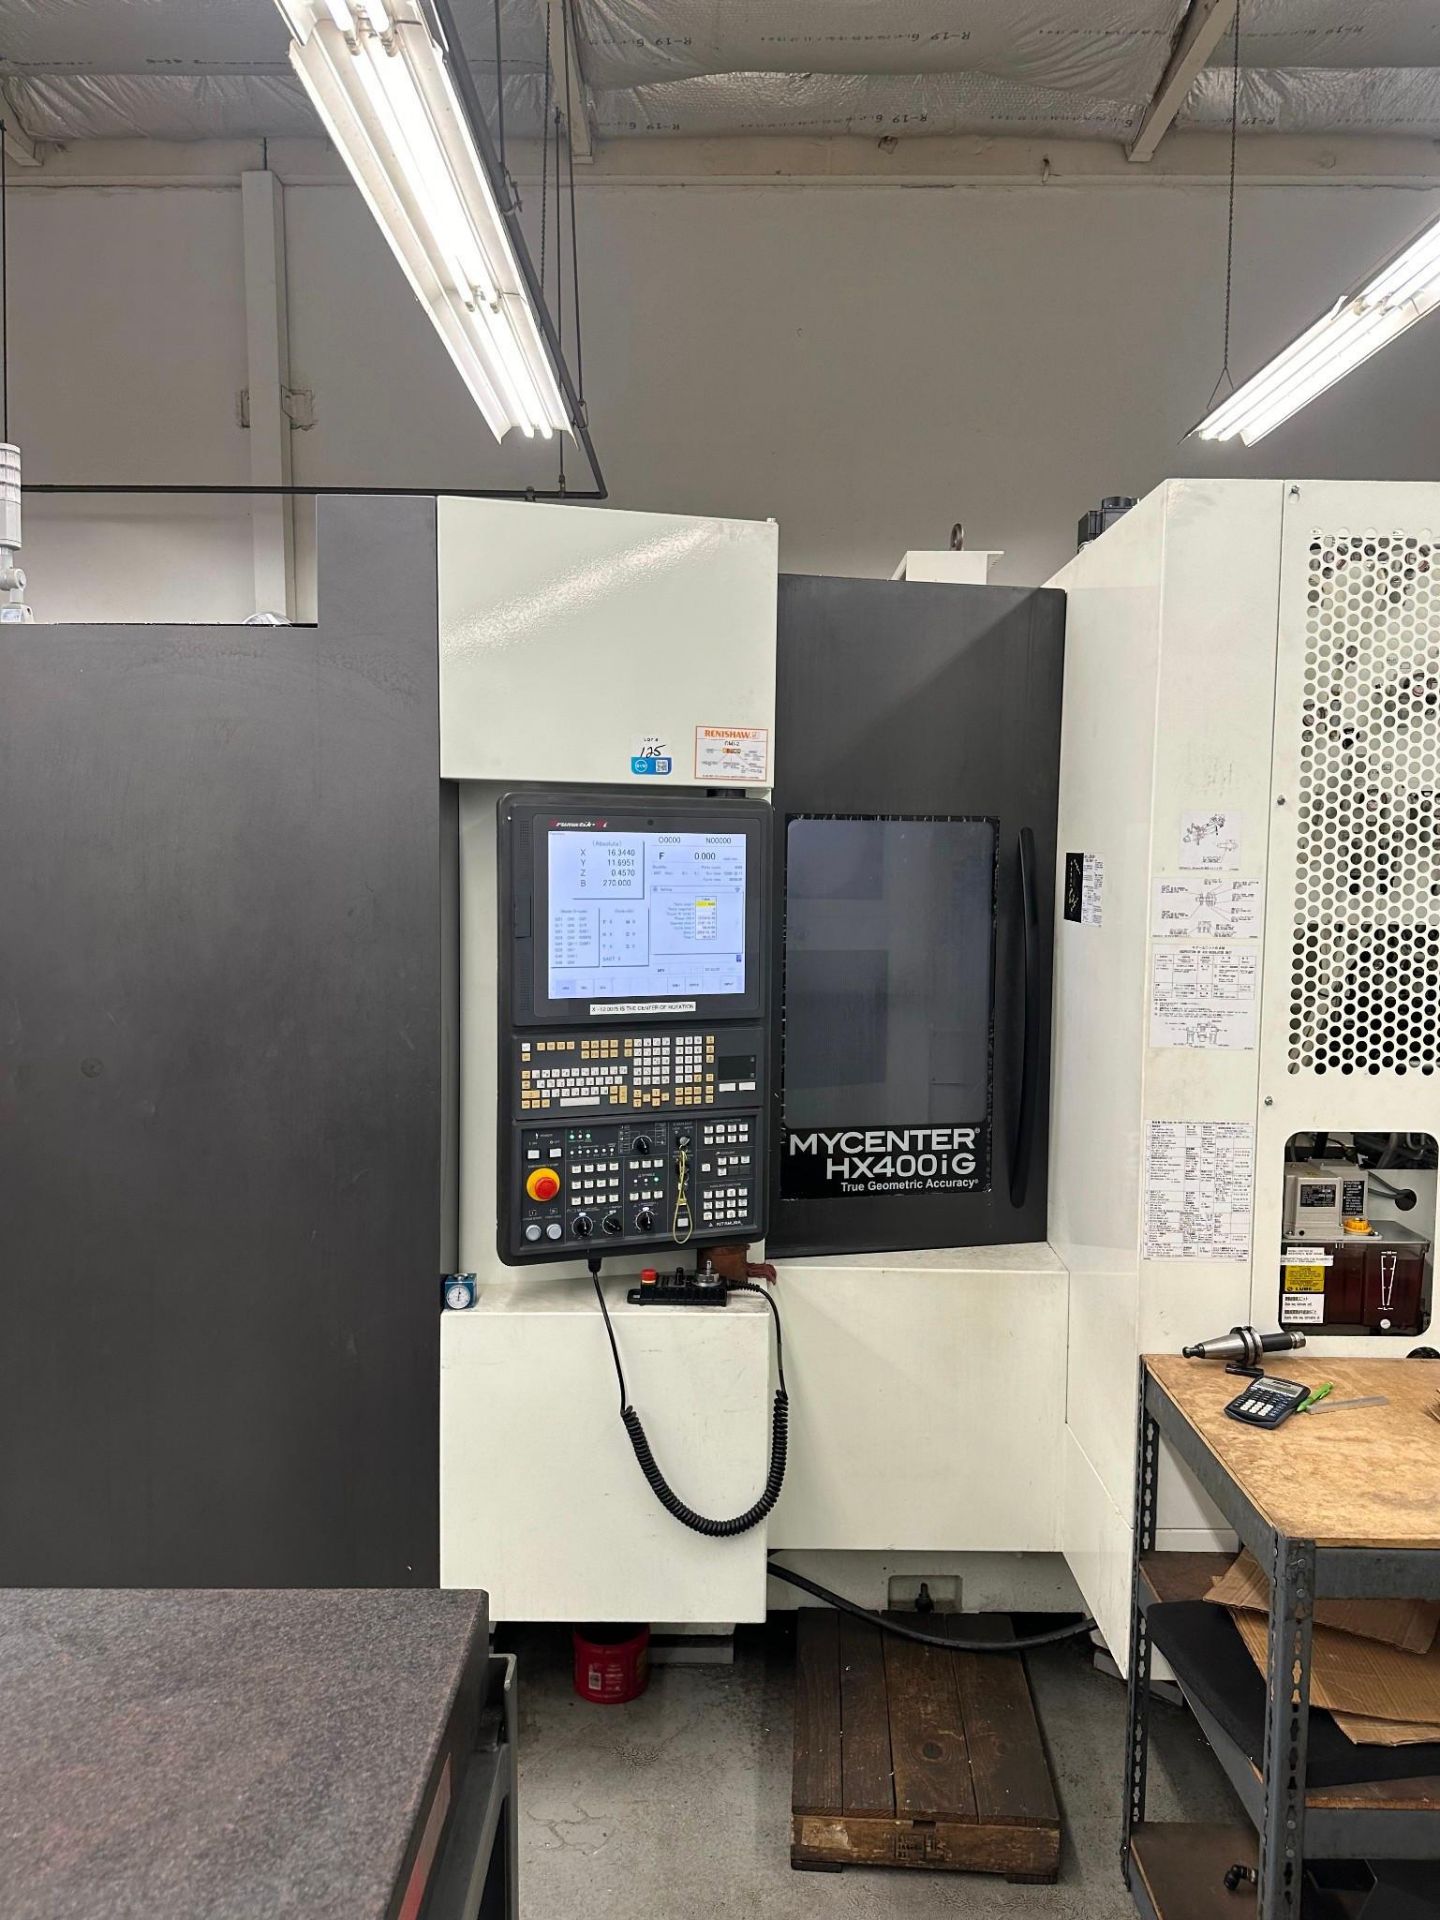 KITAMURA MYCENTER HX400IG HMC, 2018 - FULL 4TH AXIS, CTS, LINEAR SCALES - Image 9 of 17